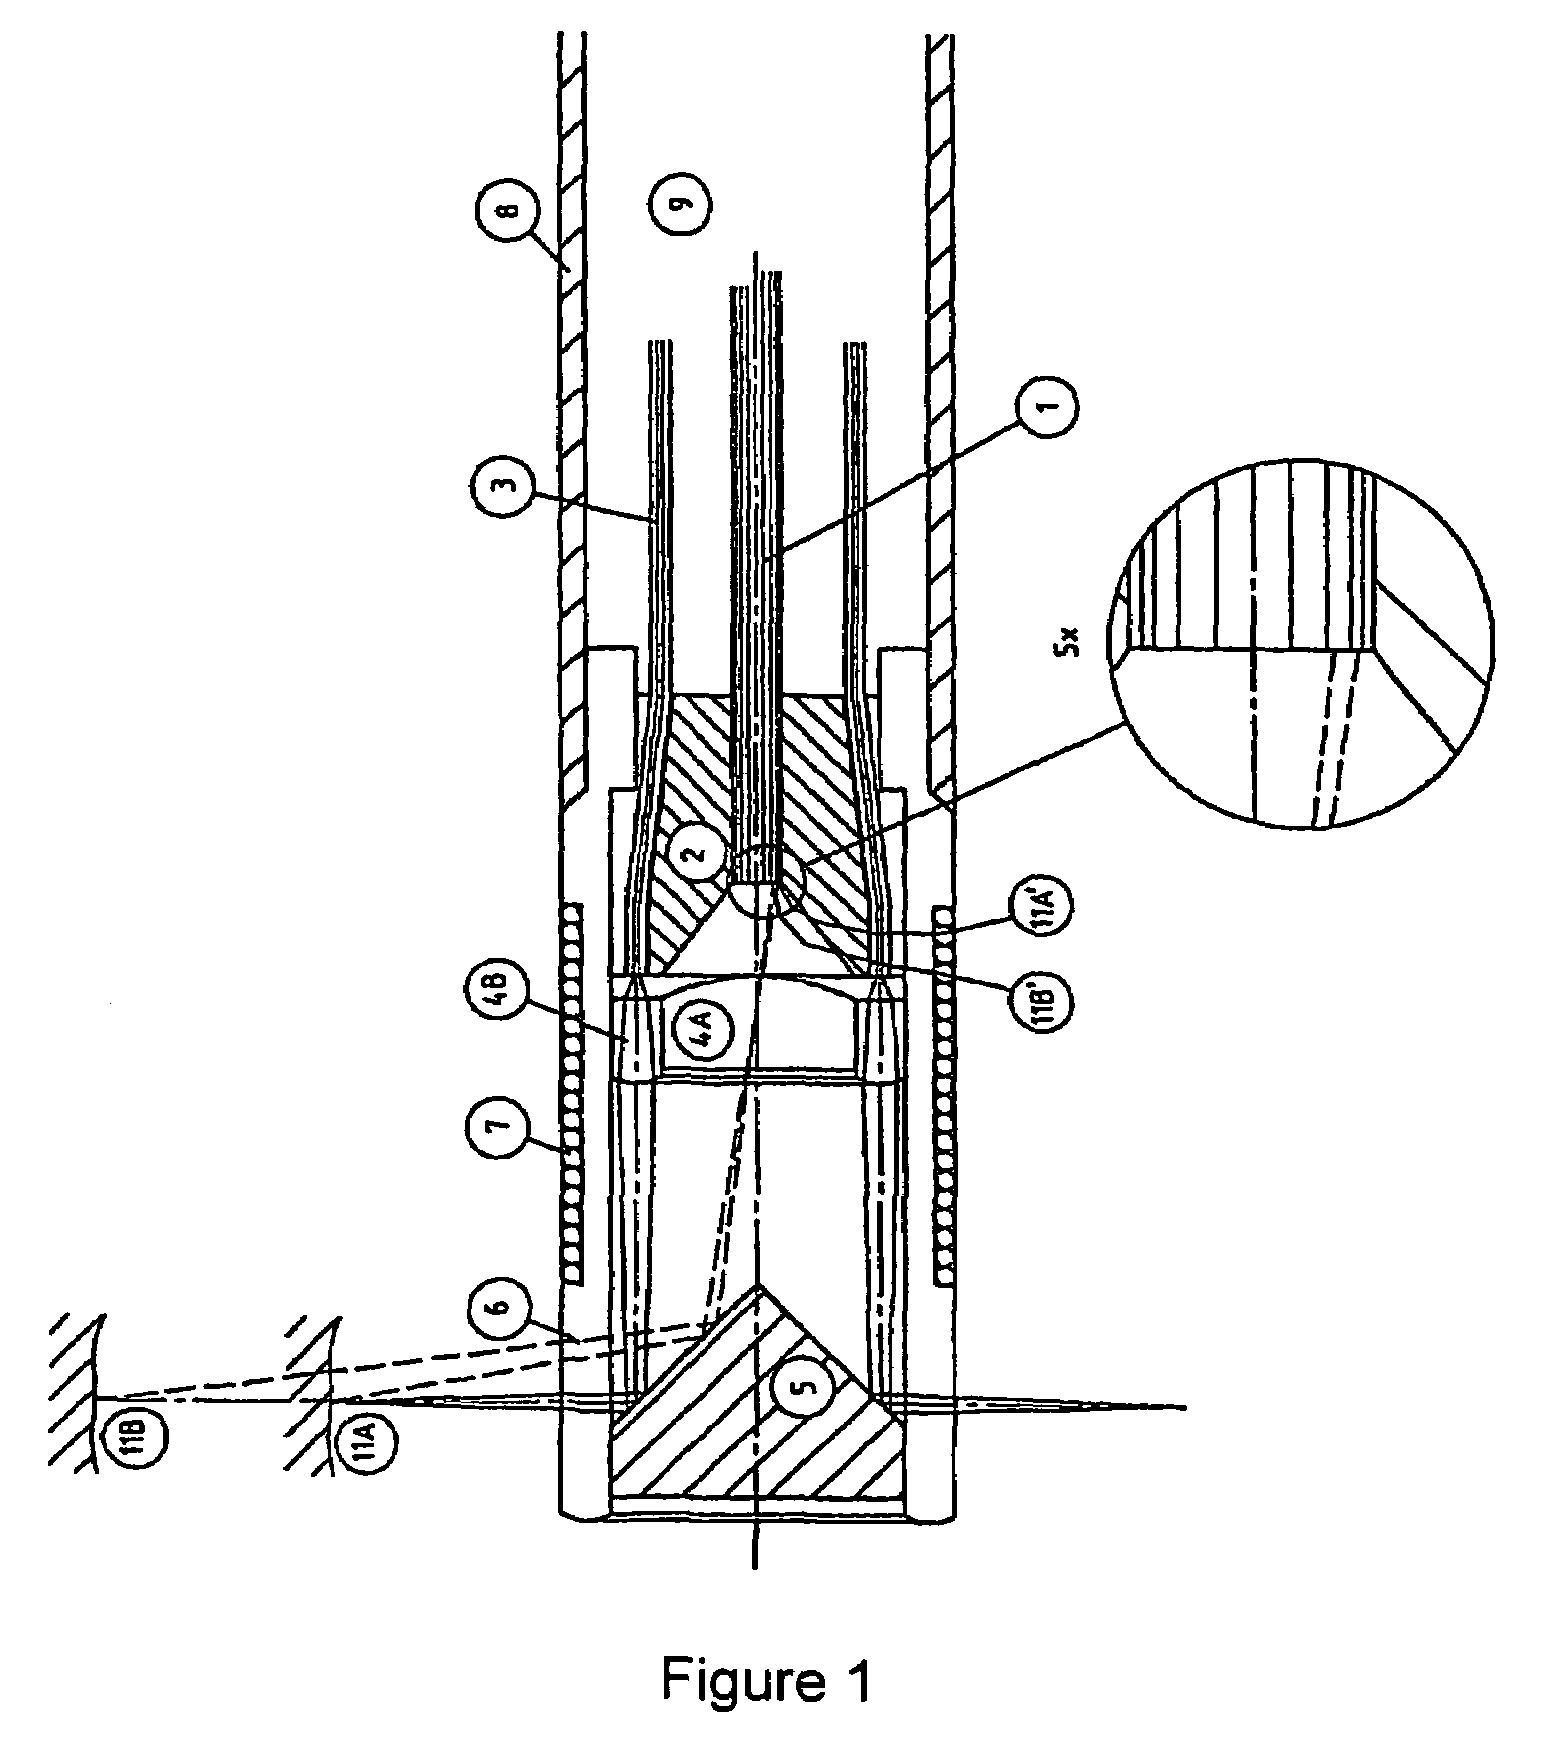 Method and apparatus for locating foreign objects in the ear canal